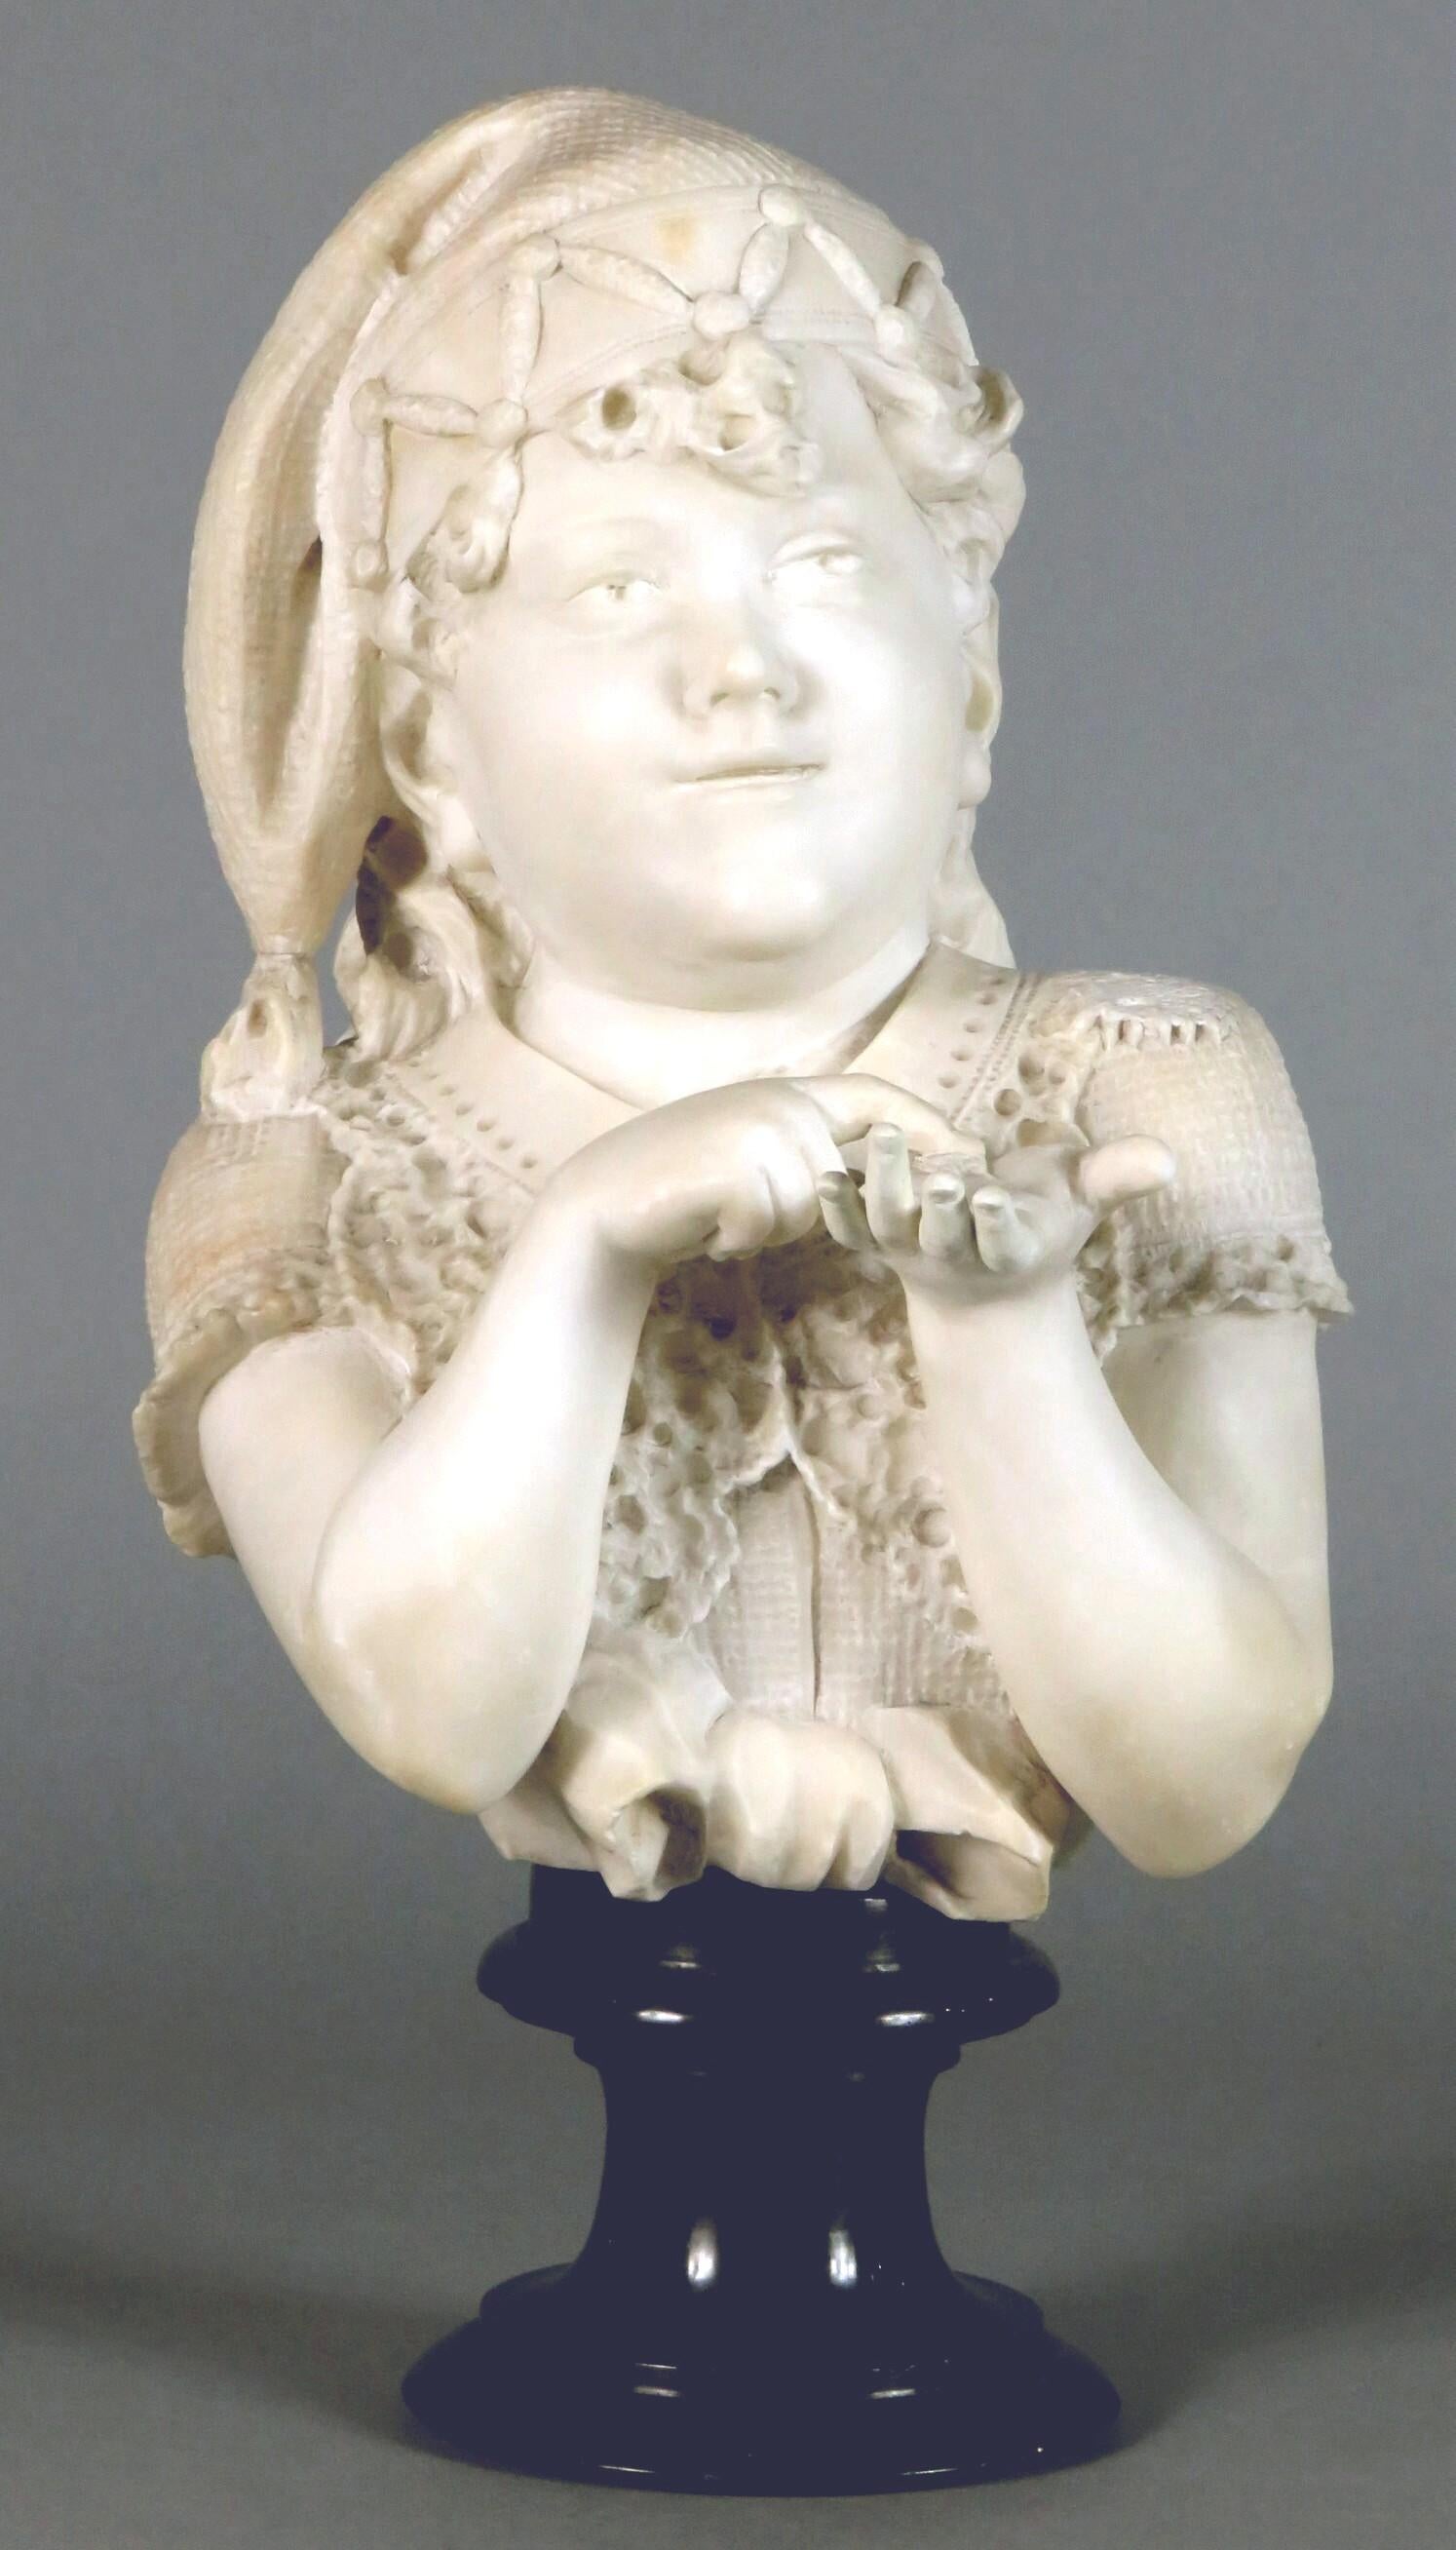 A large & very charming 19th century hand carved Carrara marble portrait bust of a young girl. Shown wearing a tasseled cap while holding the remnants of an object in her left hand, raised overall upon its original verde-antico marble socle. Signed